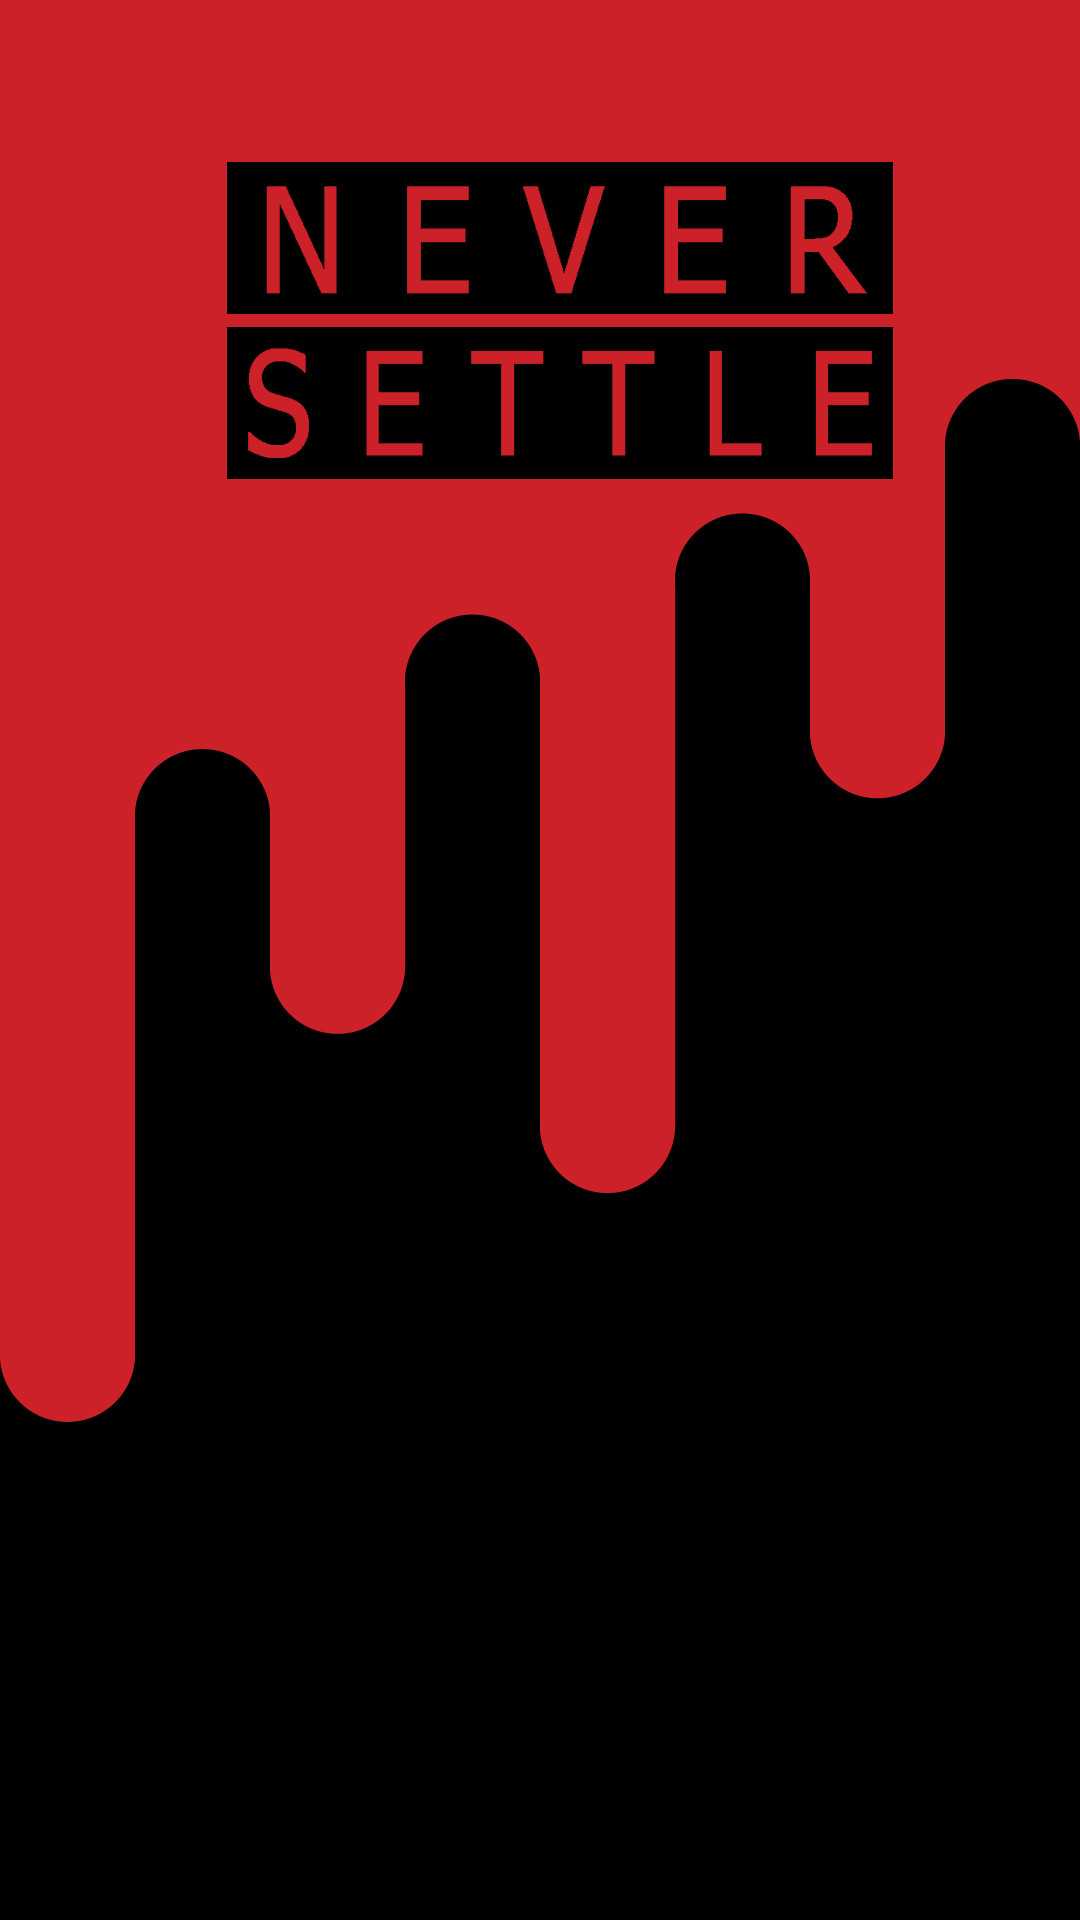 wallpaper for oneplus 3t,font,text,red,logo,graphics